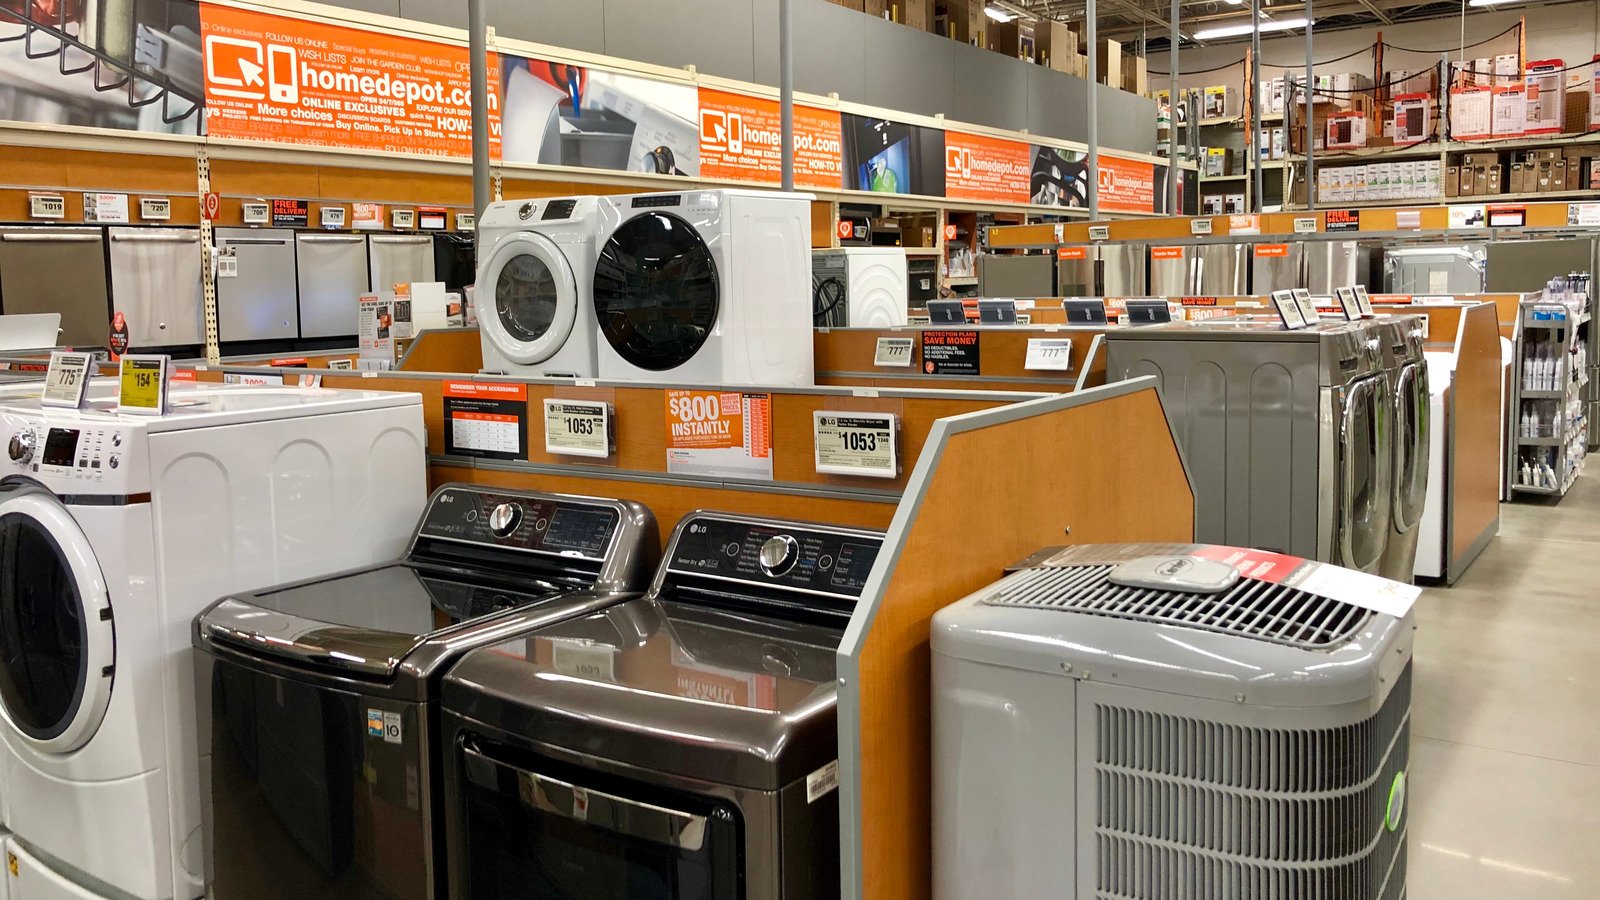 Why Buying Appliances At Home Depot May Cause You Trouble